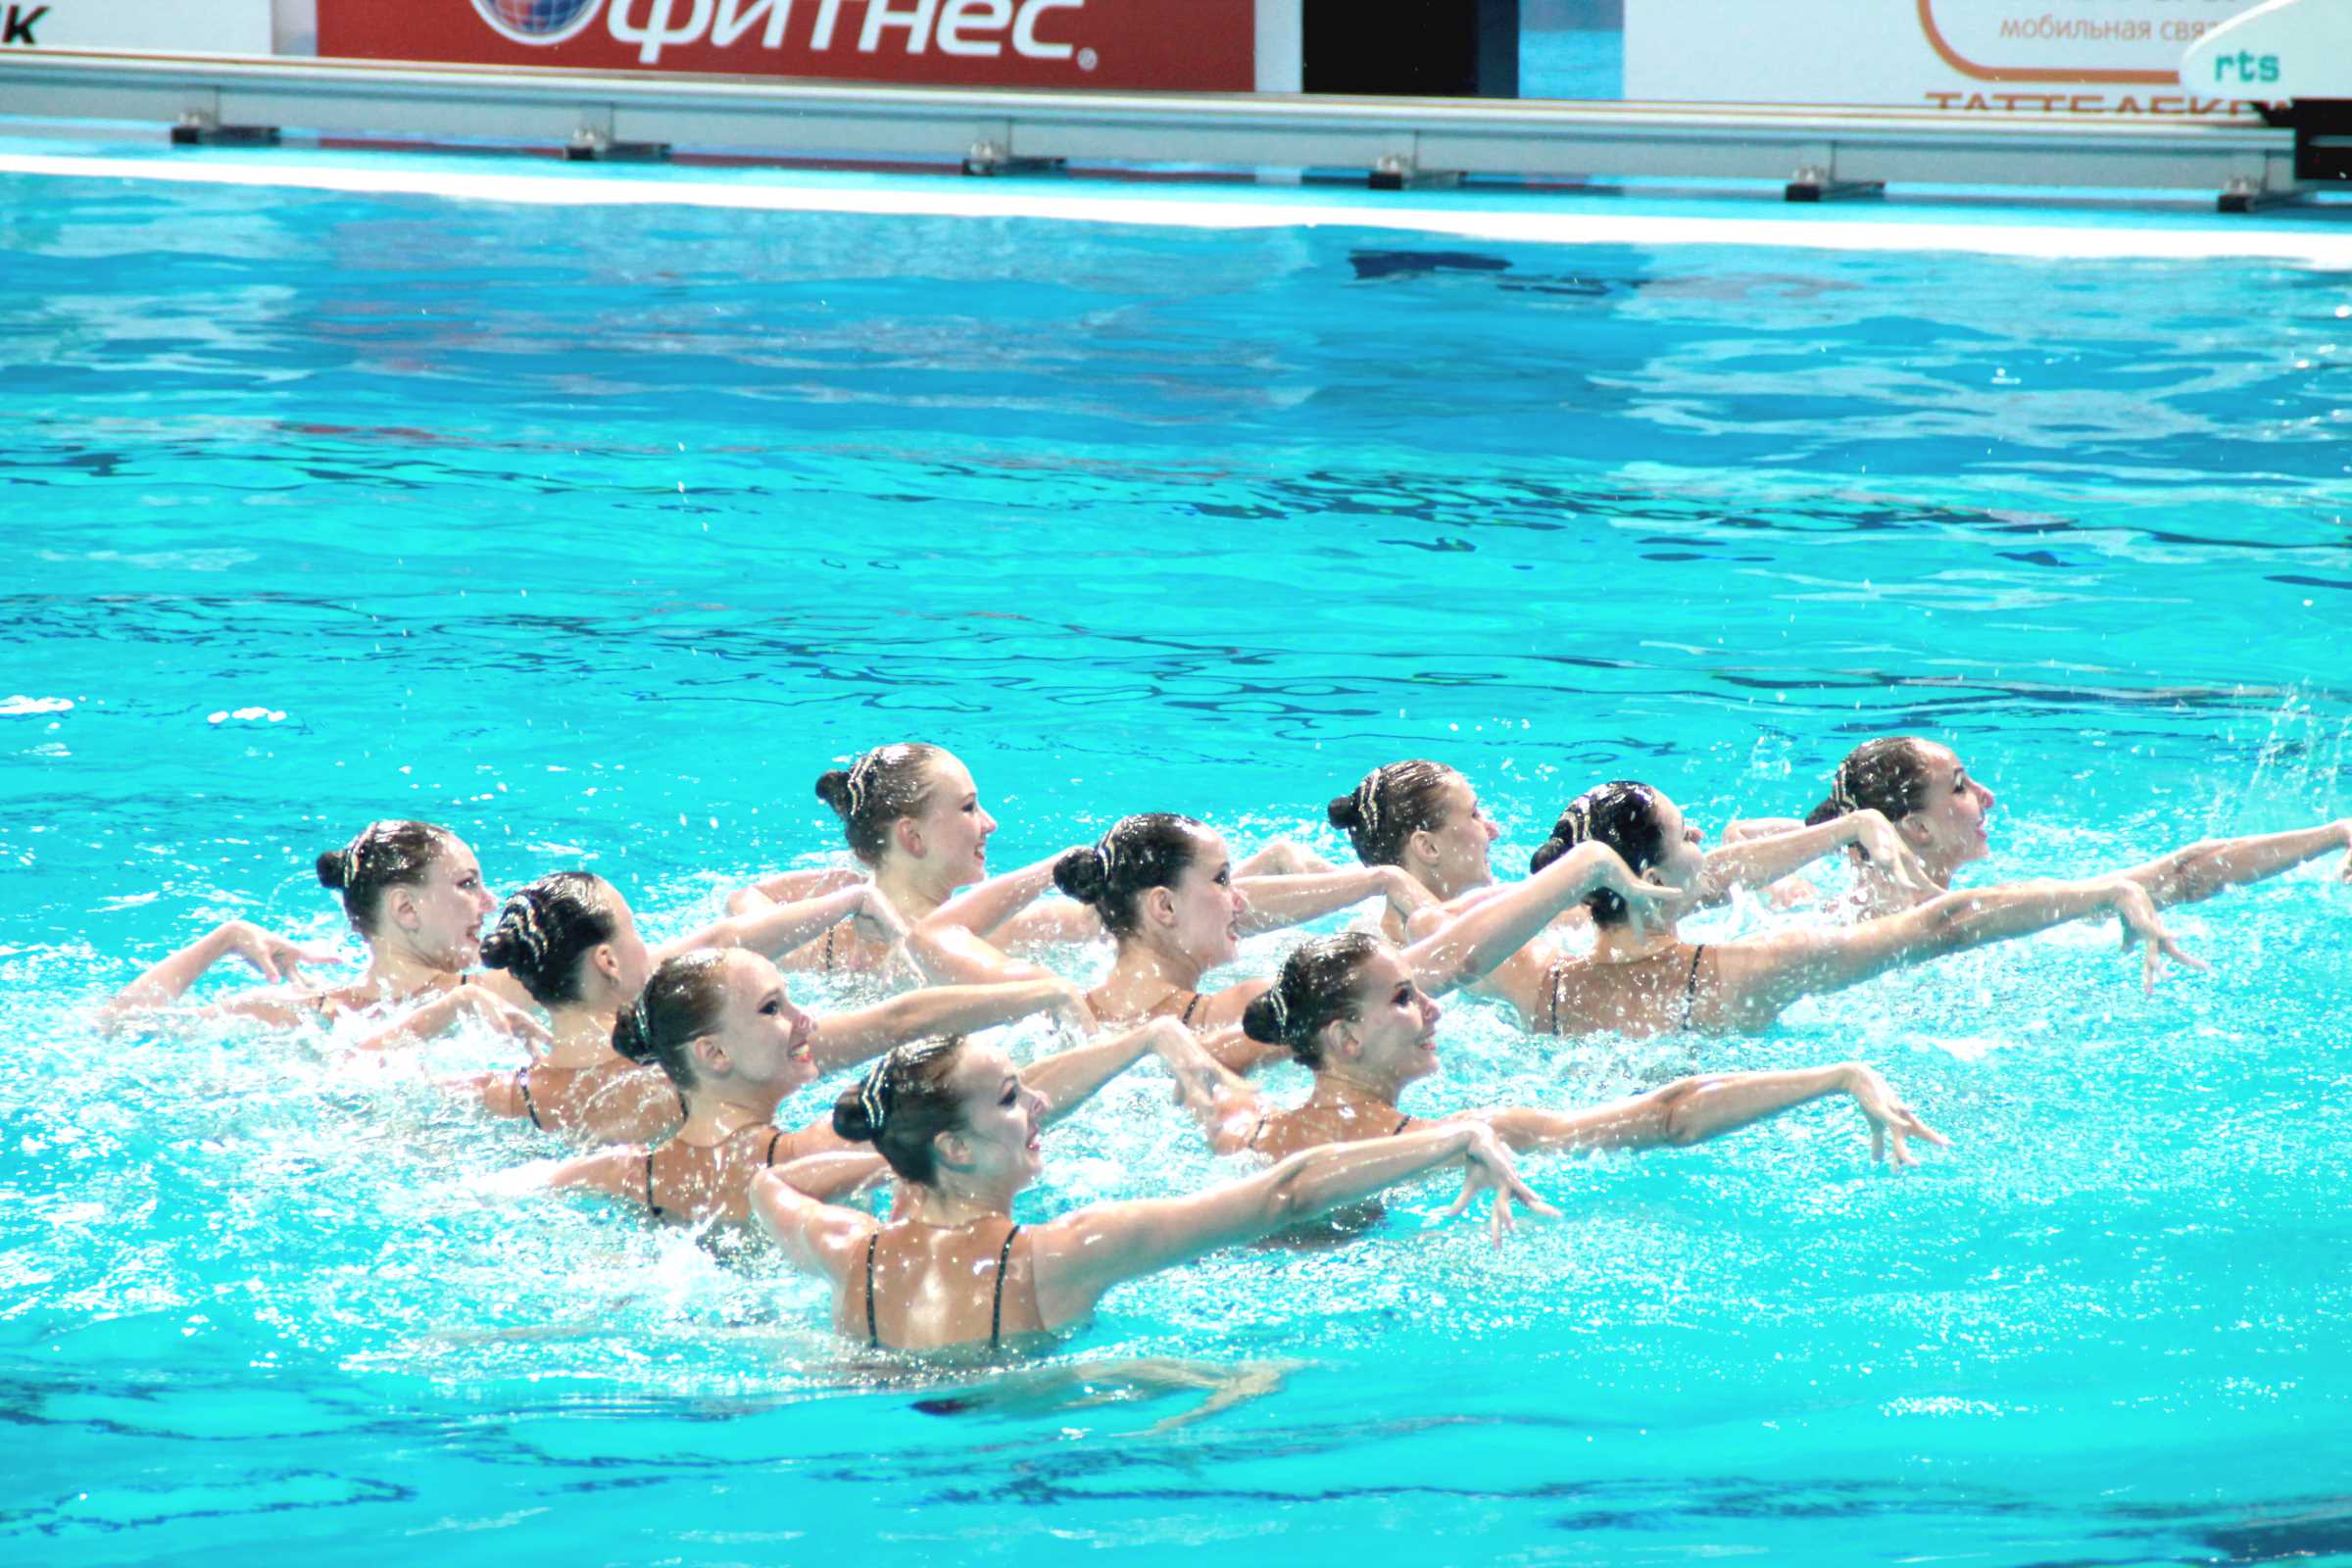 Russia Closes Out Dominance In Synchronized Swimming With Free Combo Win At FINA World